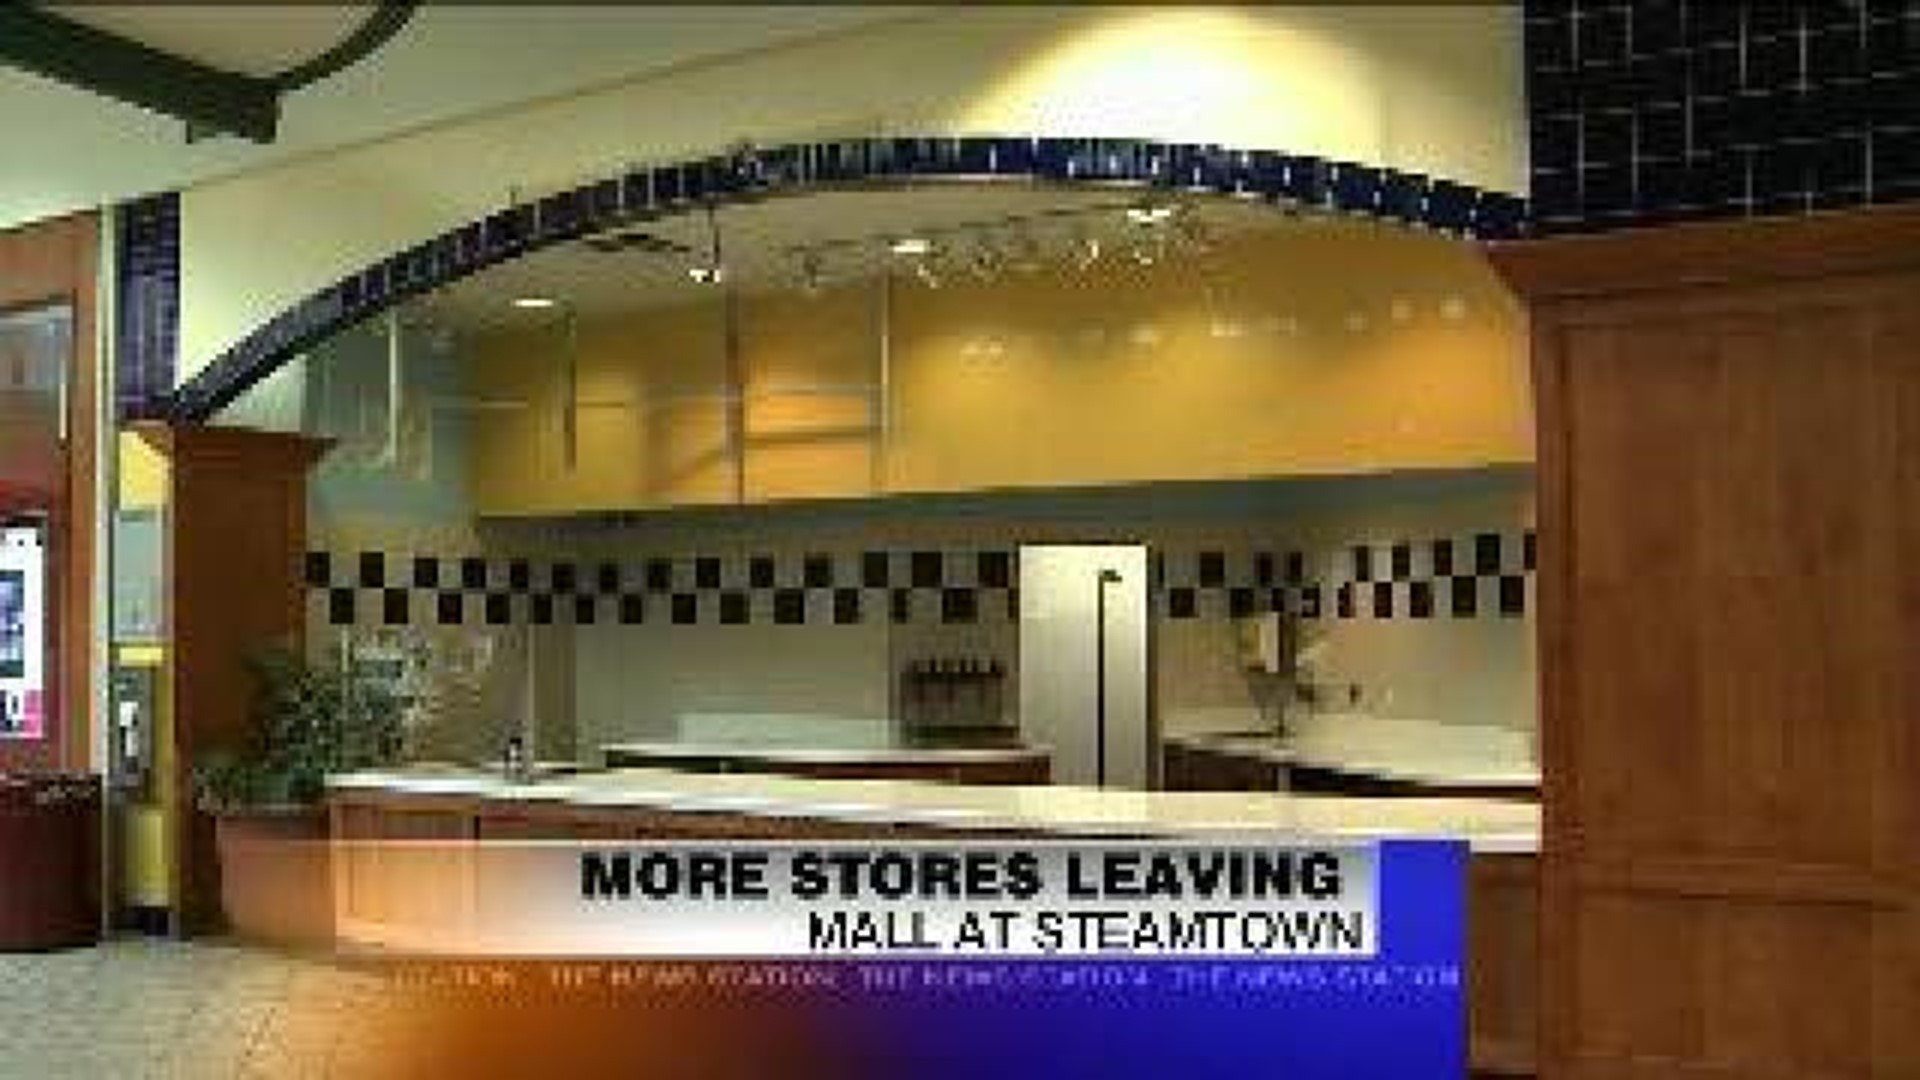 More Stores Leaving Struggling Mall At Steamtown